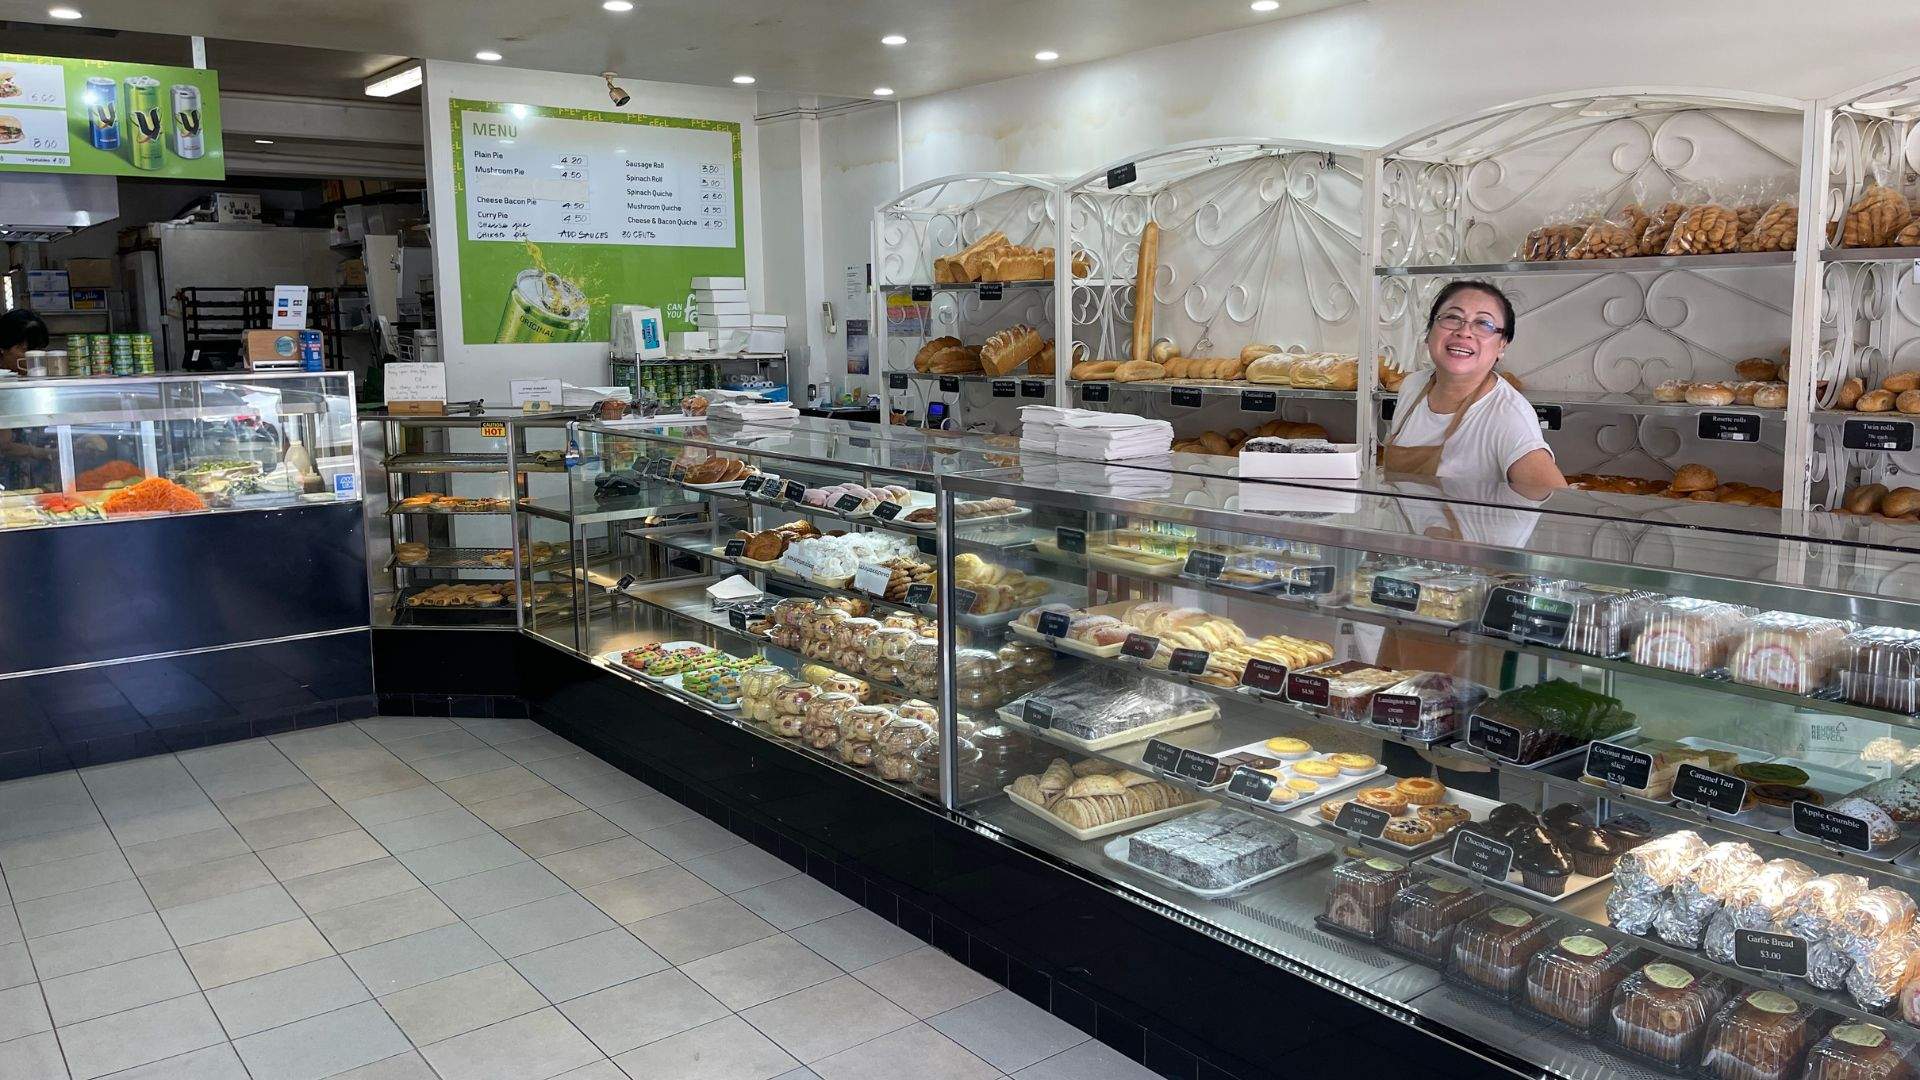 Interiors of Belmore Continental bakery, featuring a cameo by beloved bakery owner, Tina. 